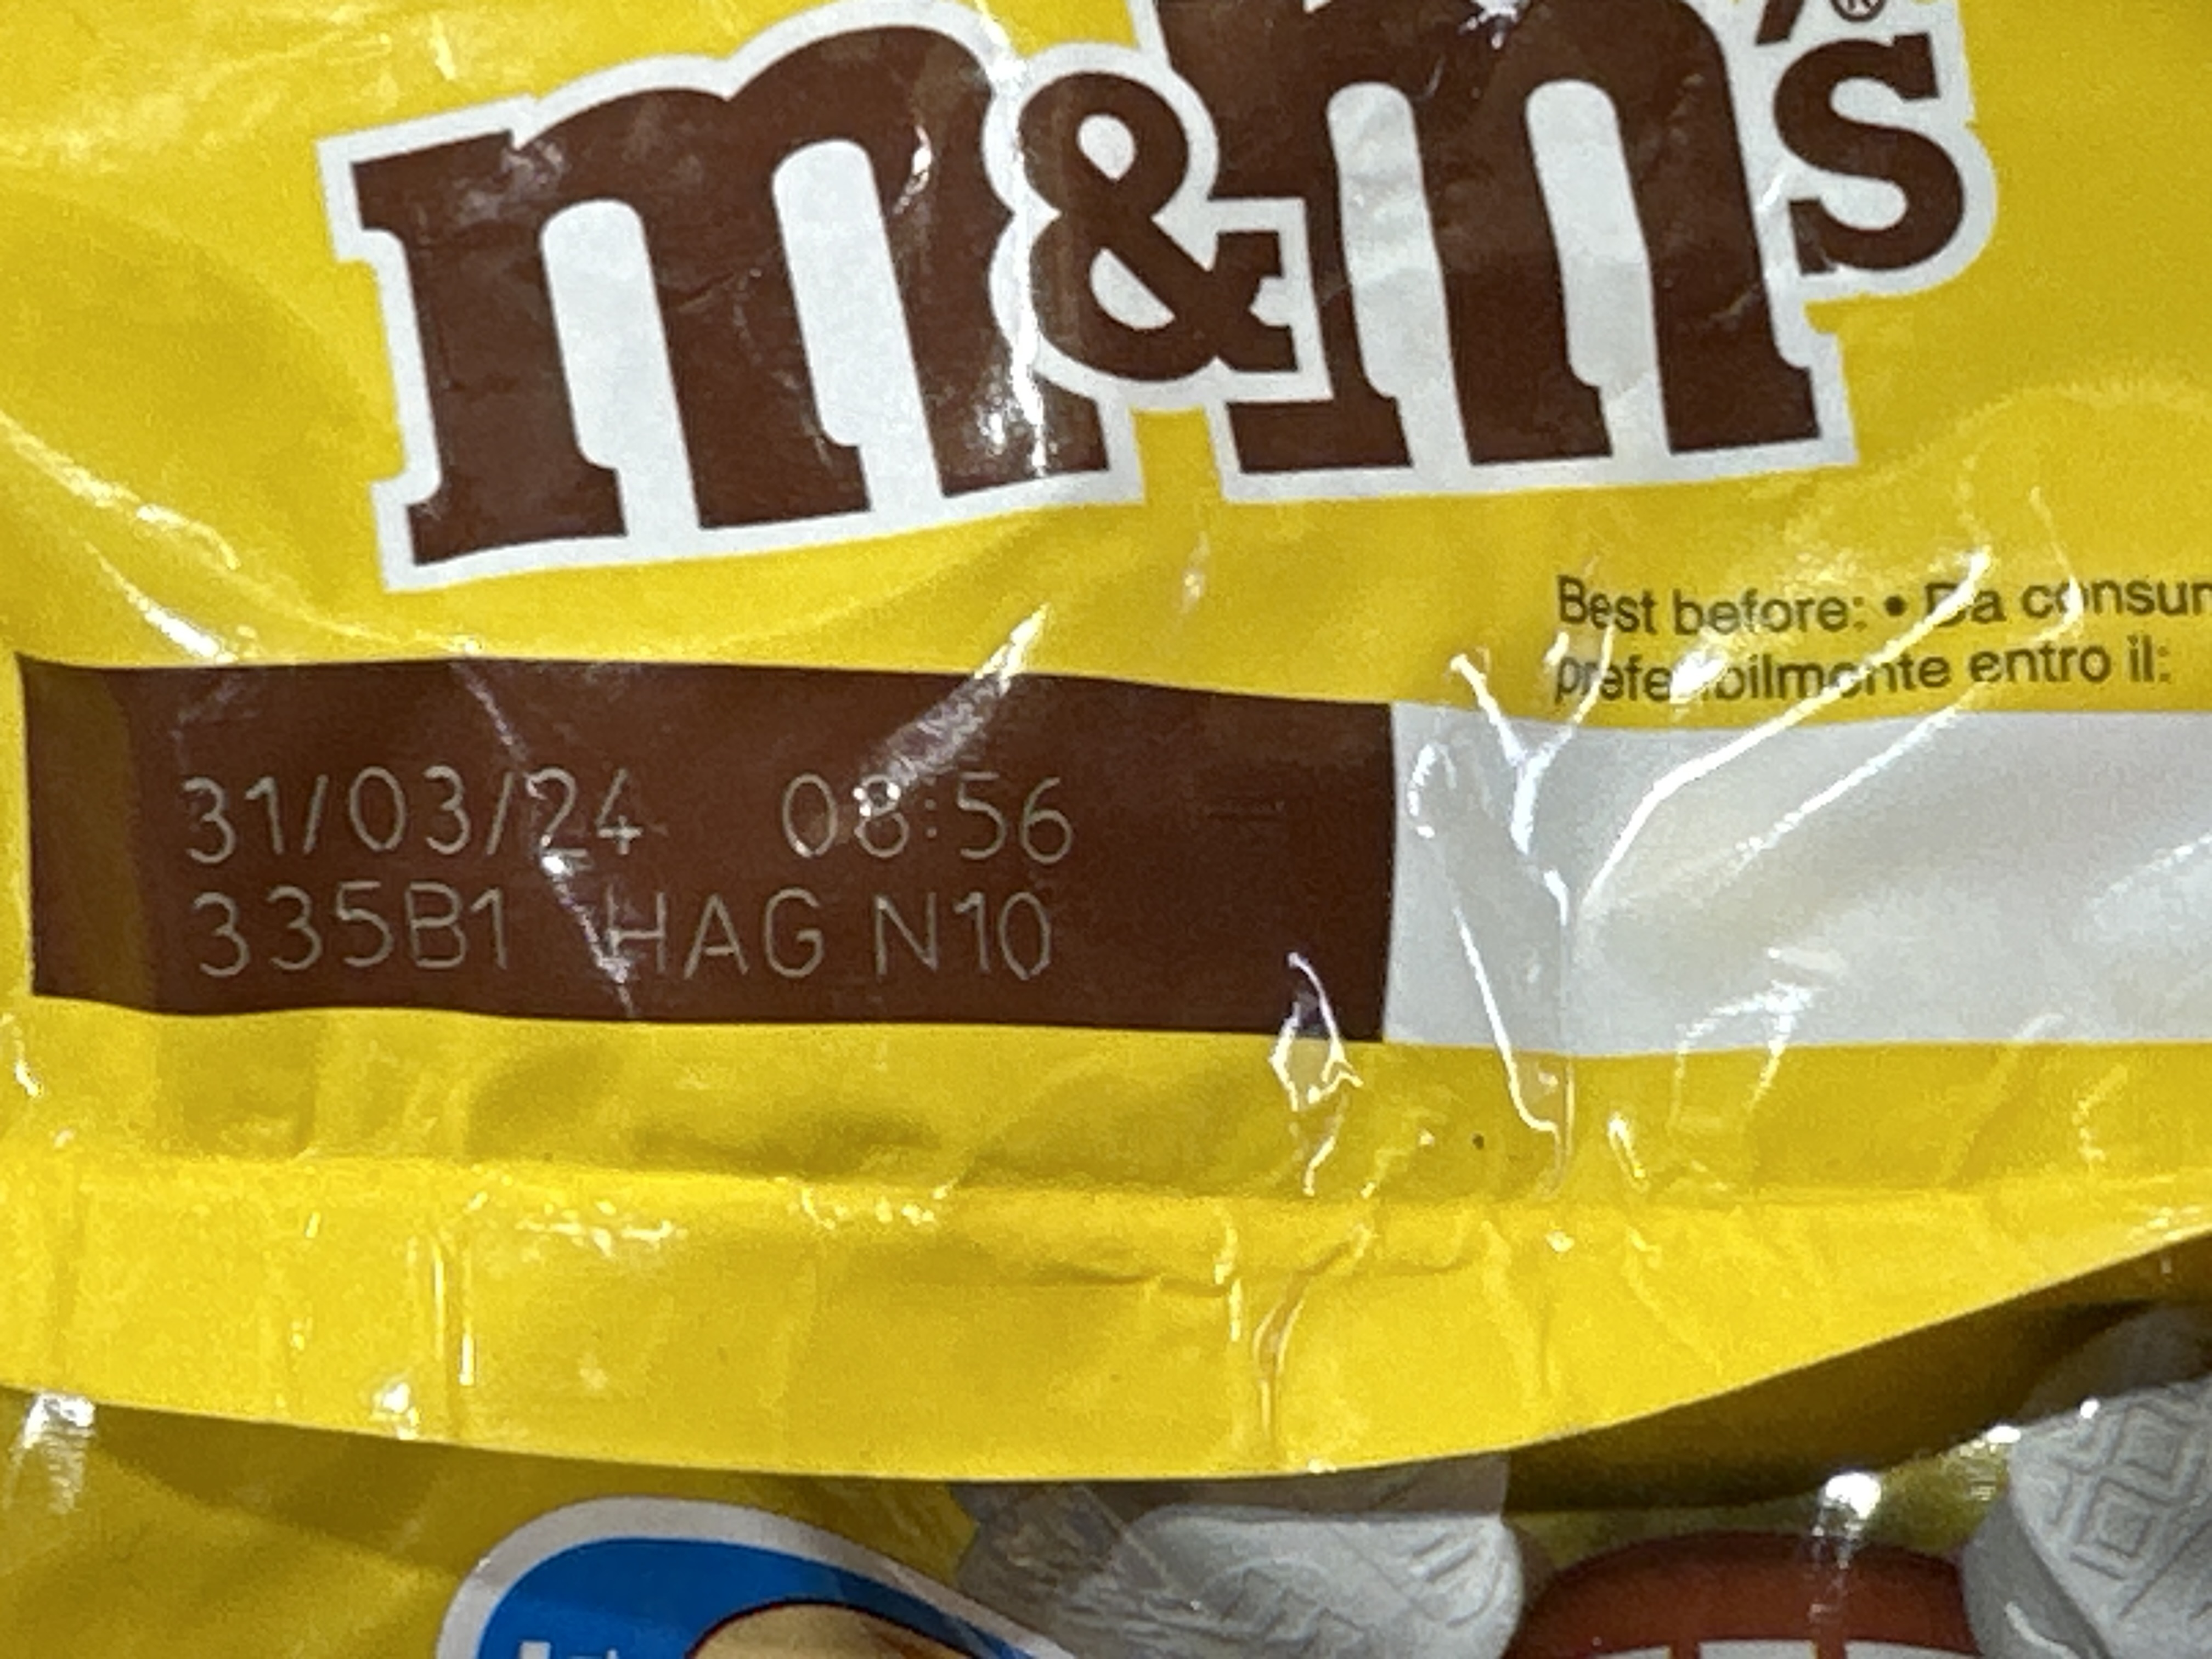 M&Ms Peanut Chocolate Party Bulk Bag, Chocolate Gift Sweets, 5 X 1kg = 5KG  TOTAL - BEST BEFORE DATE 26/11/2023